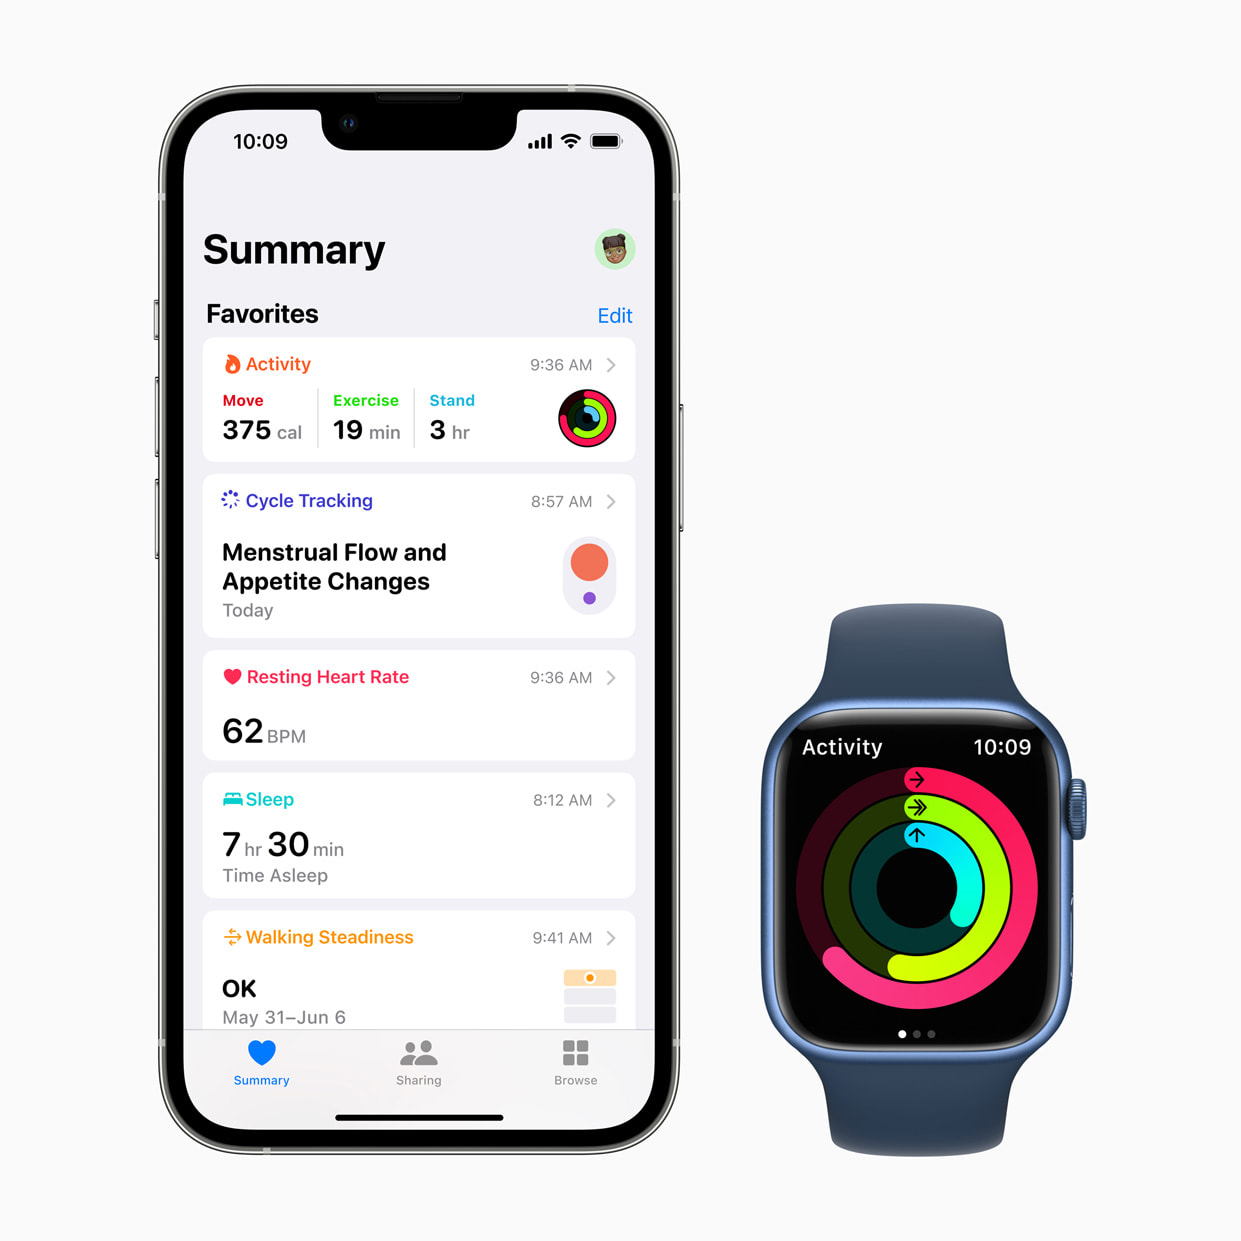 Apple Health App Overview Tutorial is Now Available! –